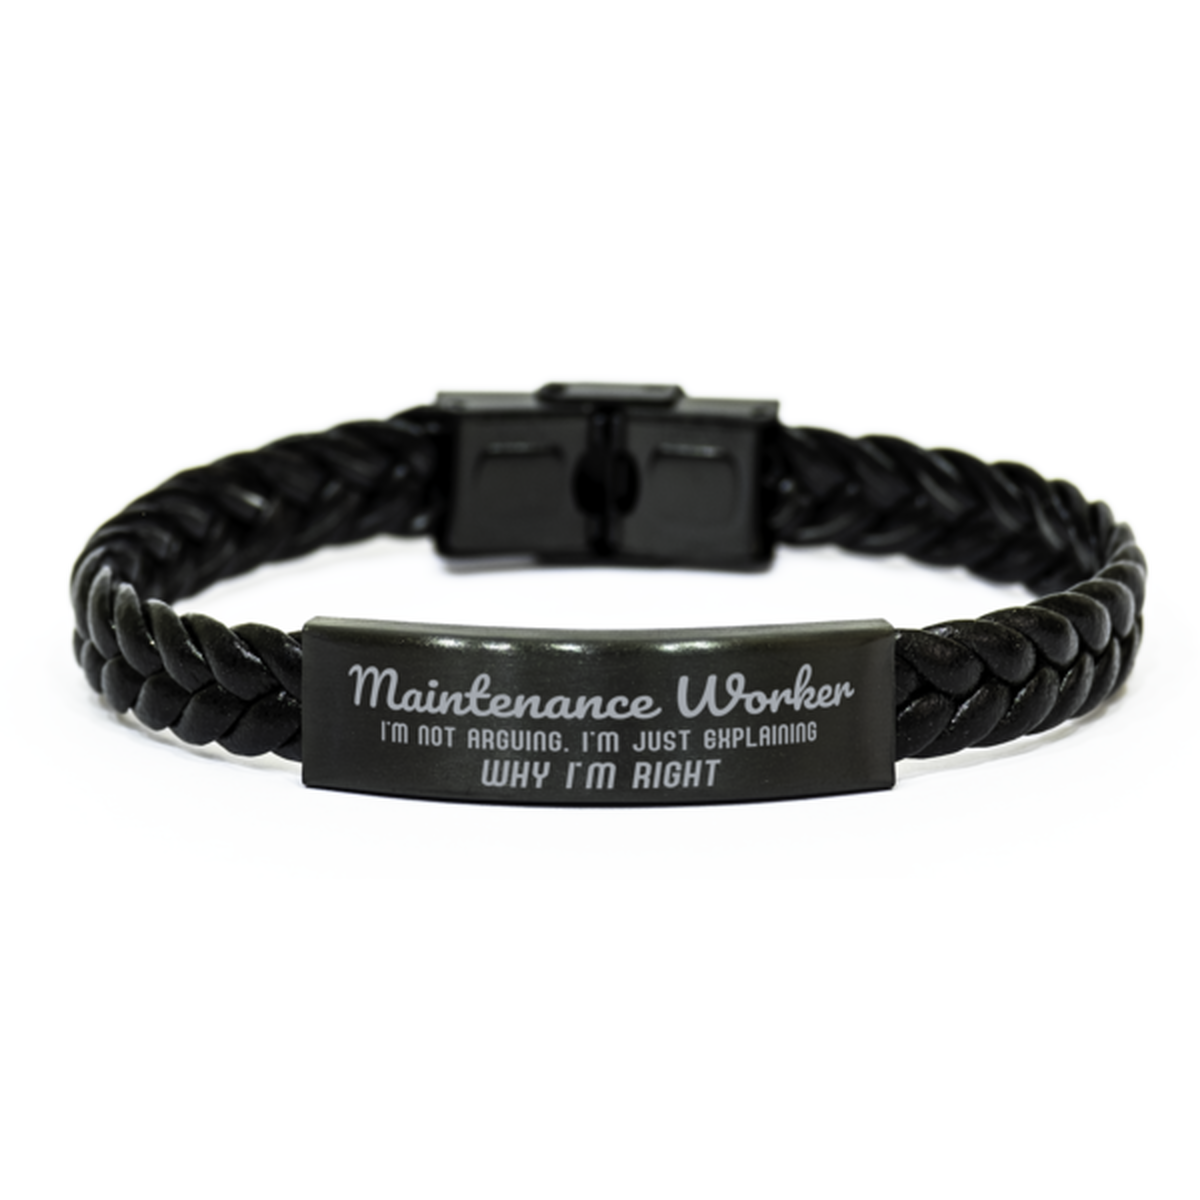 Maintenance Worker I'm not Arguing. I'm Just Explaining Why I'm RIGHT Braided Leather Bracelet, Graduation Birthday Christmas Maintenance Worker Gifts For Maintenance Worker Funny Saying Quote Present for Men Women Coworker